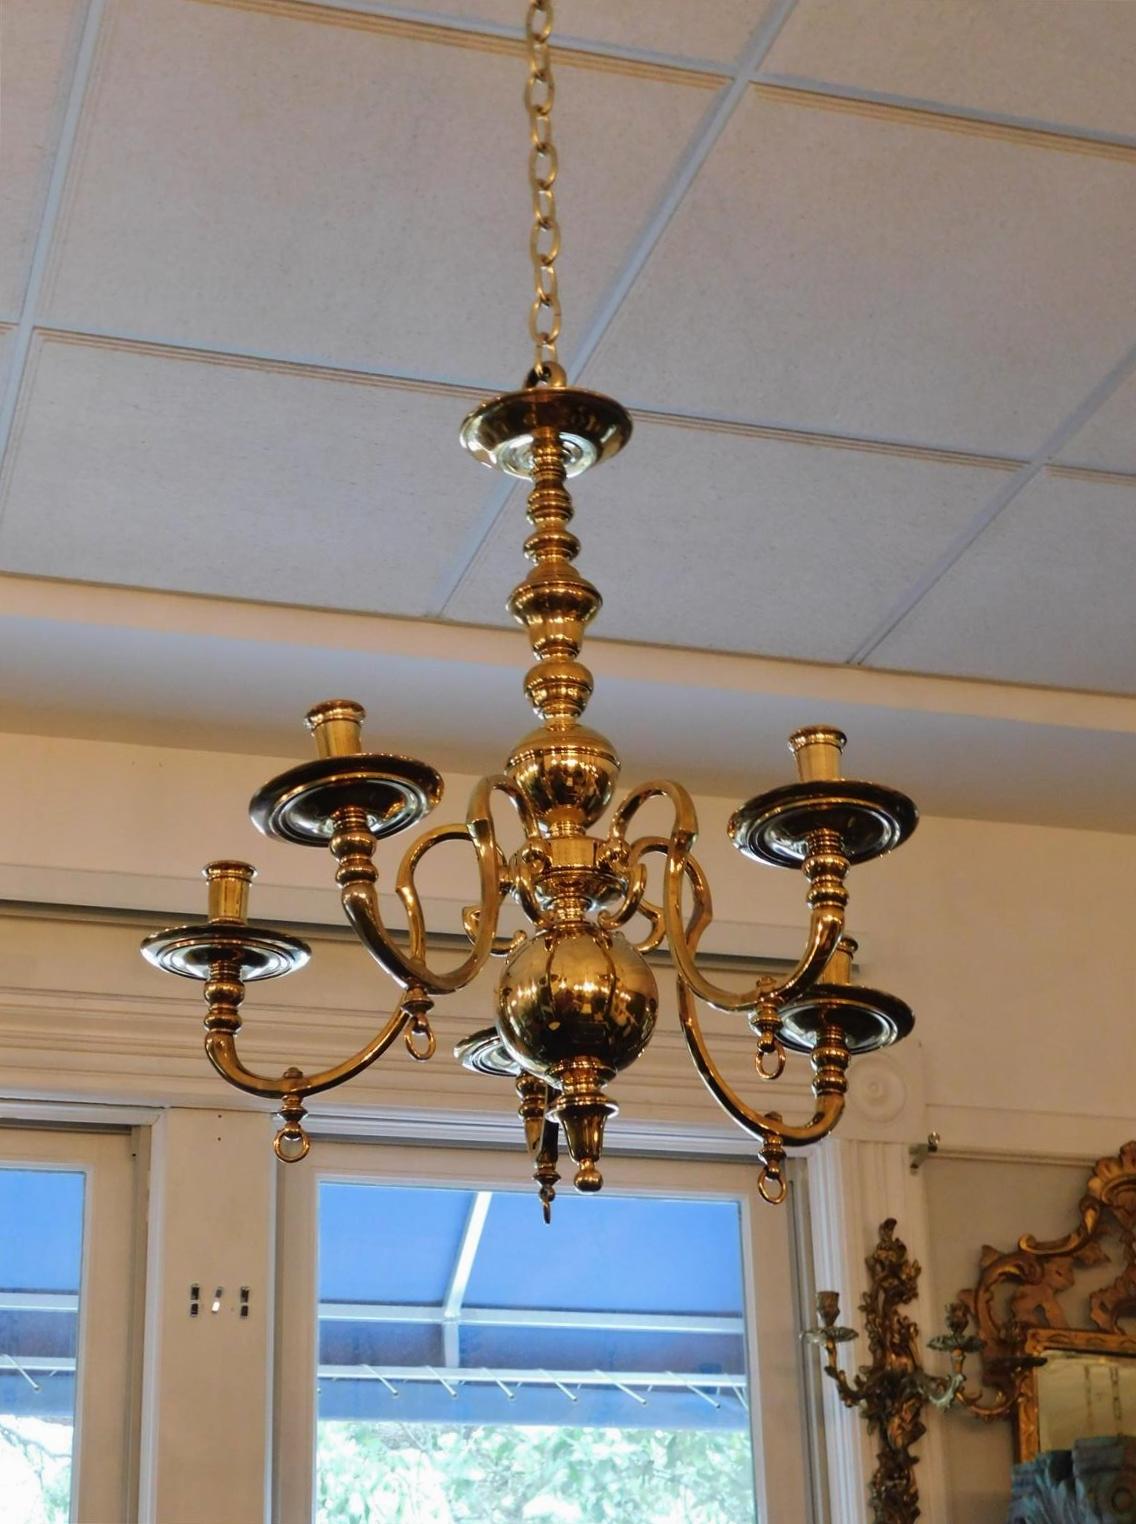 American brass scrolled five arm bulbous column chandelier with original cock keys, bobeches, and lower central ball with urn finial . Originally gas powered. Chandelier can be electrified if desired at no additional cost. Mid 19th Century.